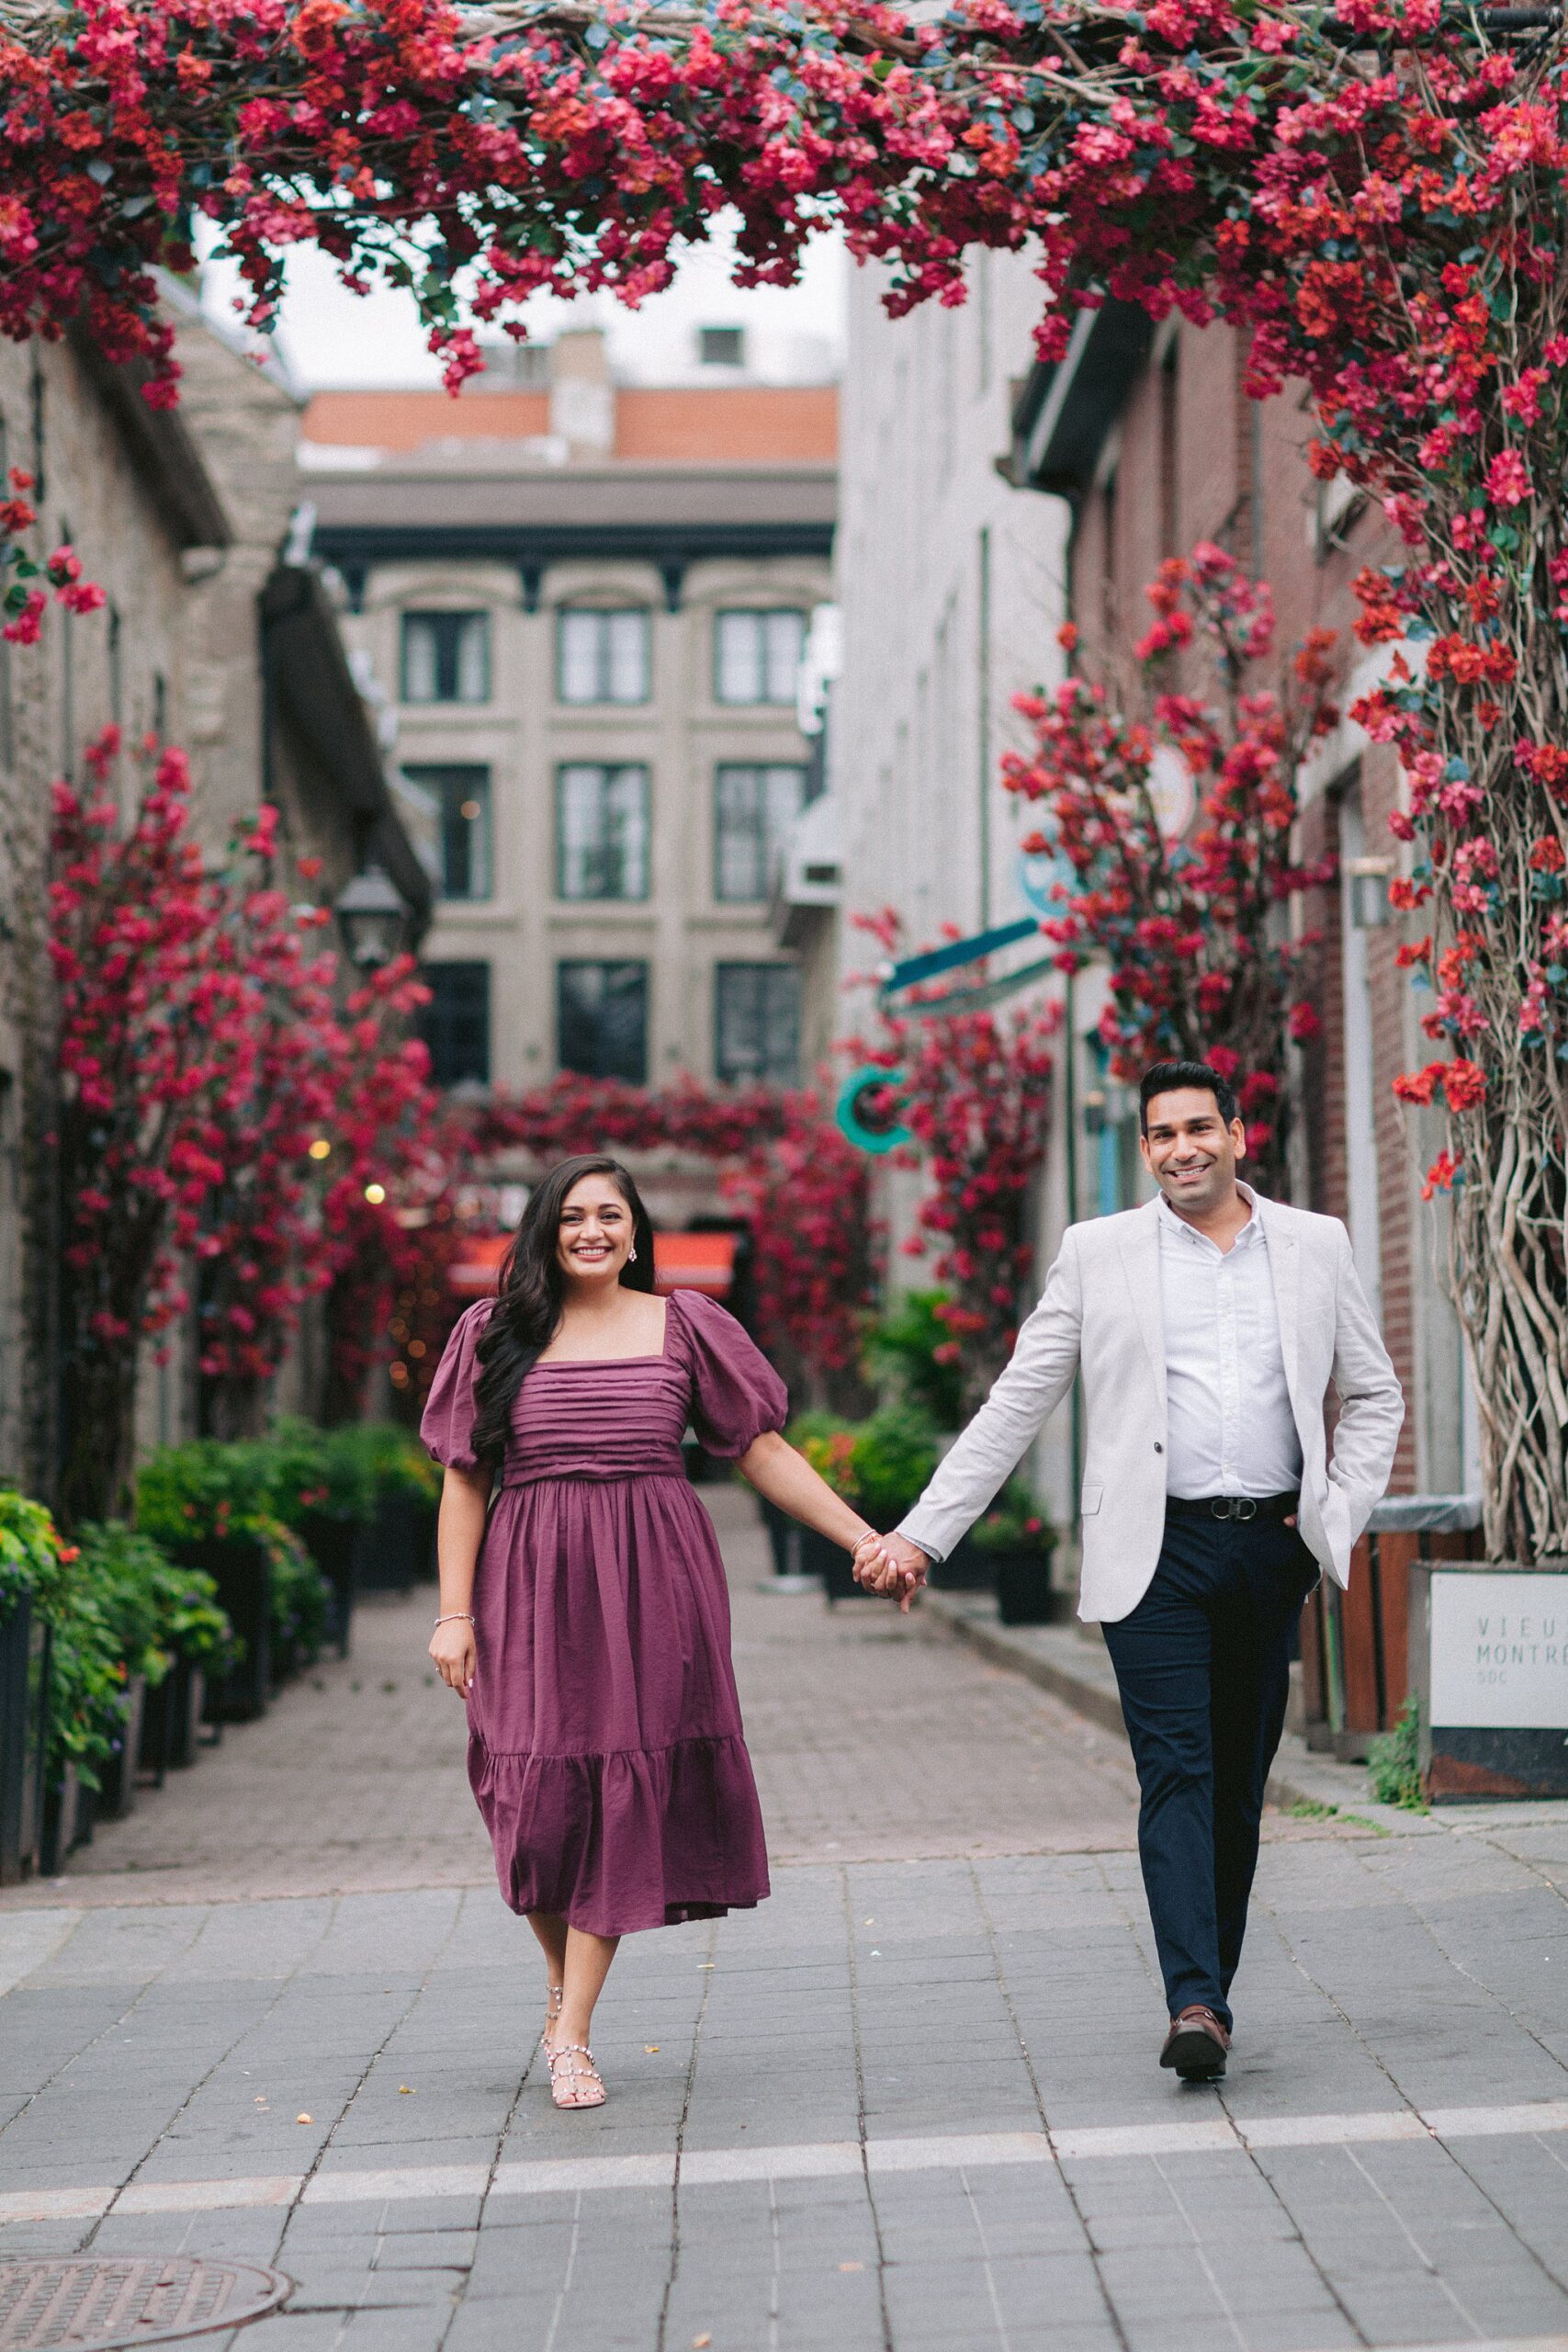 Captured joy and love during their engagement in Montreal